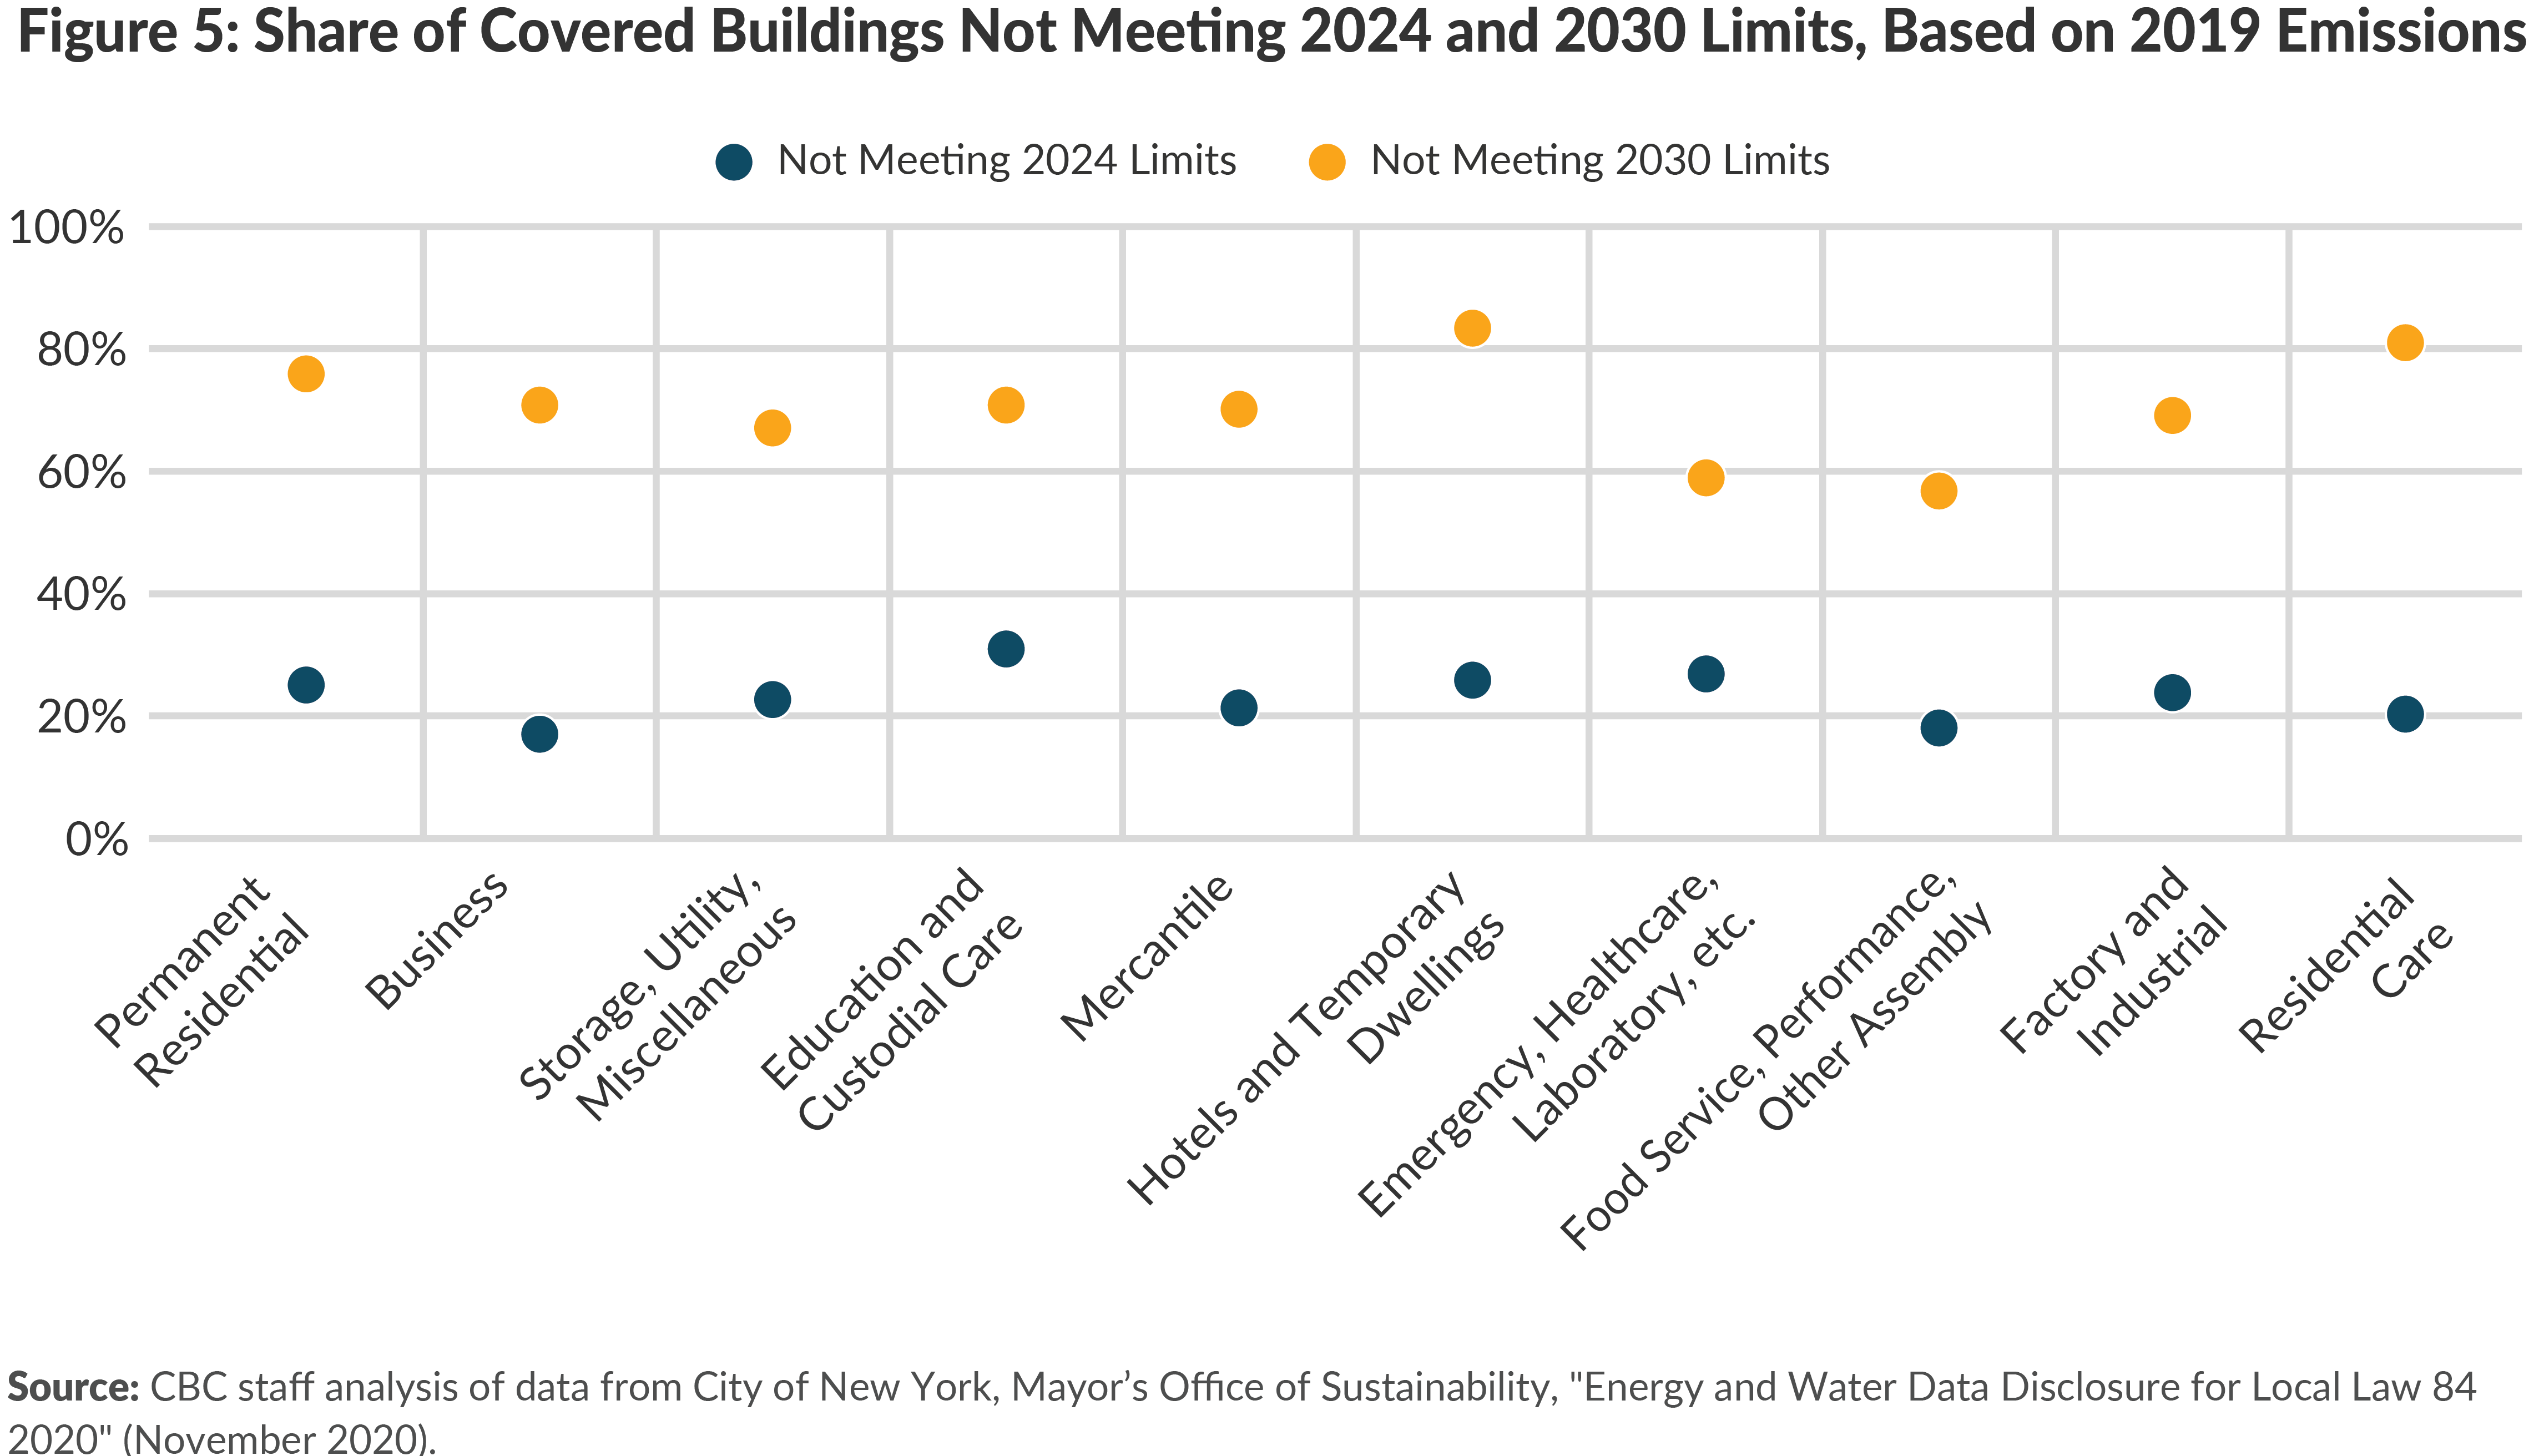 Figure 5. Share of Covered Buildings Not Meeting 2024 and 2030 Limits, Based on 2019 Emissions